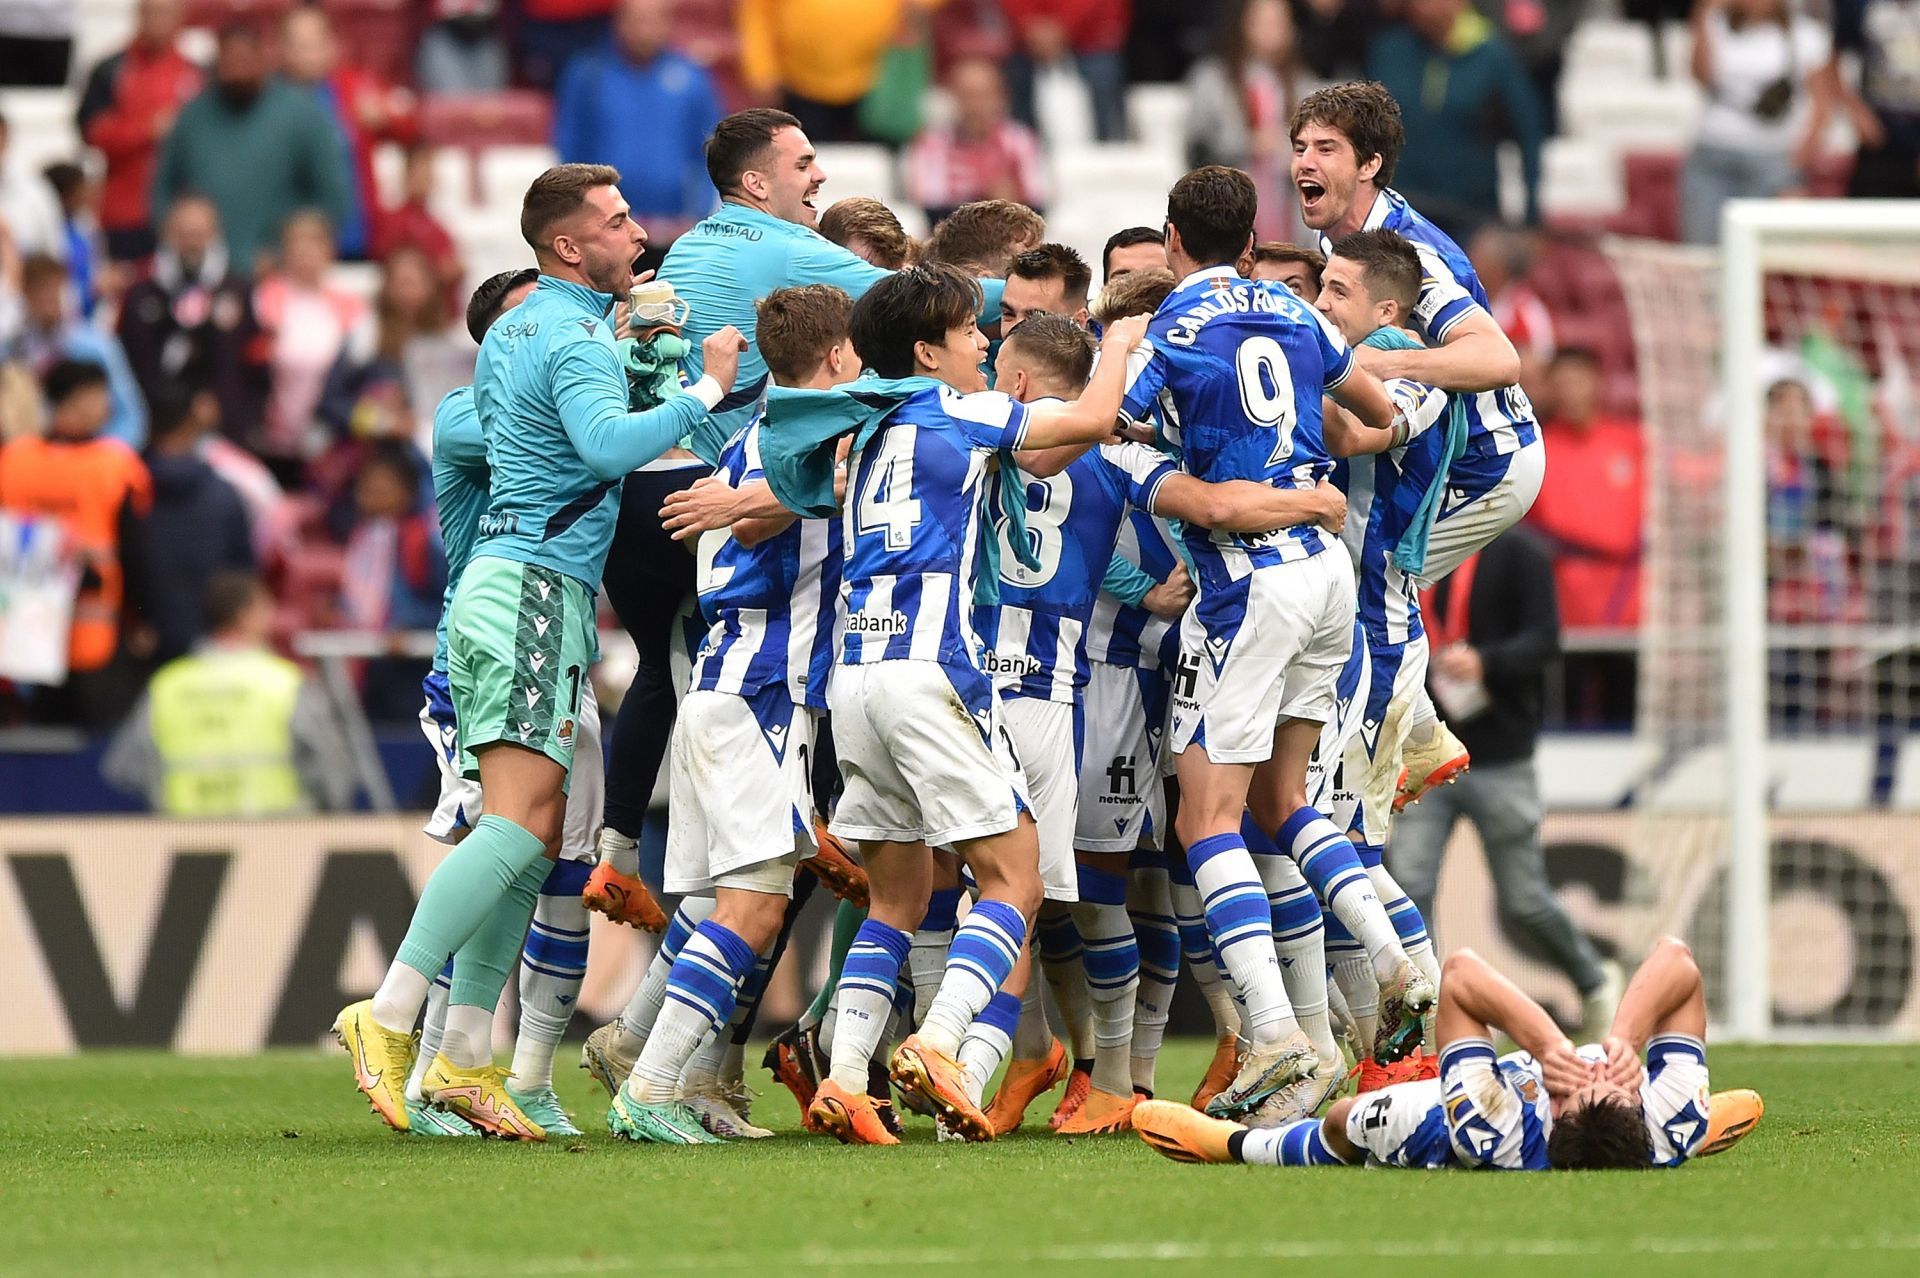 Real Sociedad have qualified for the Champions League